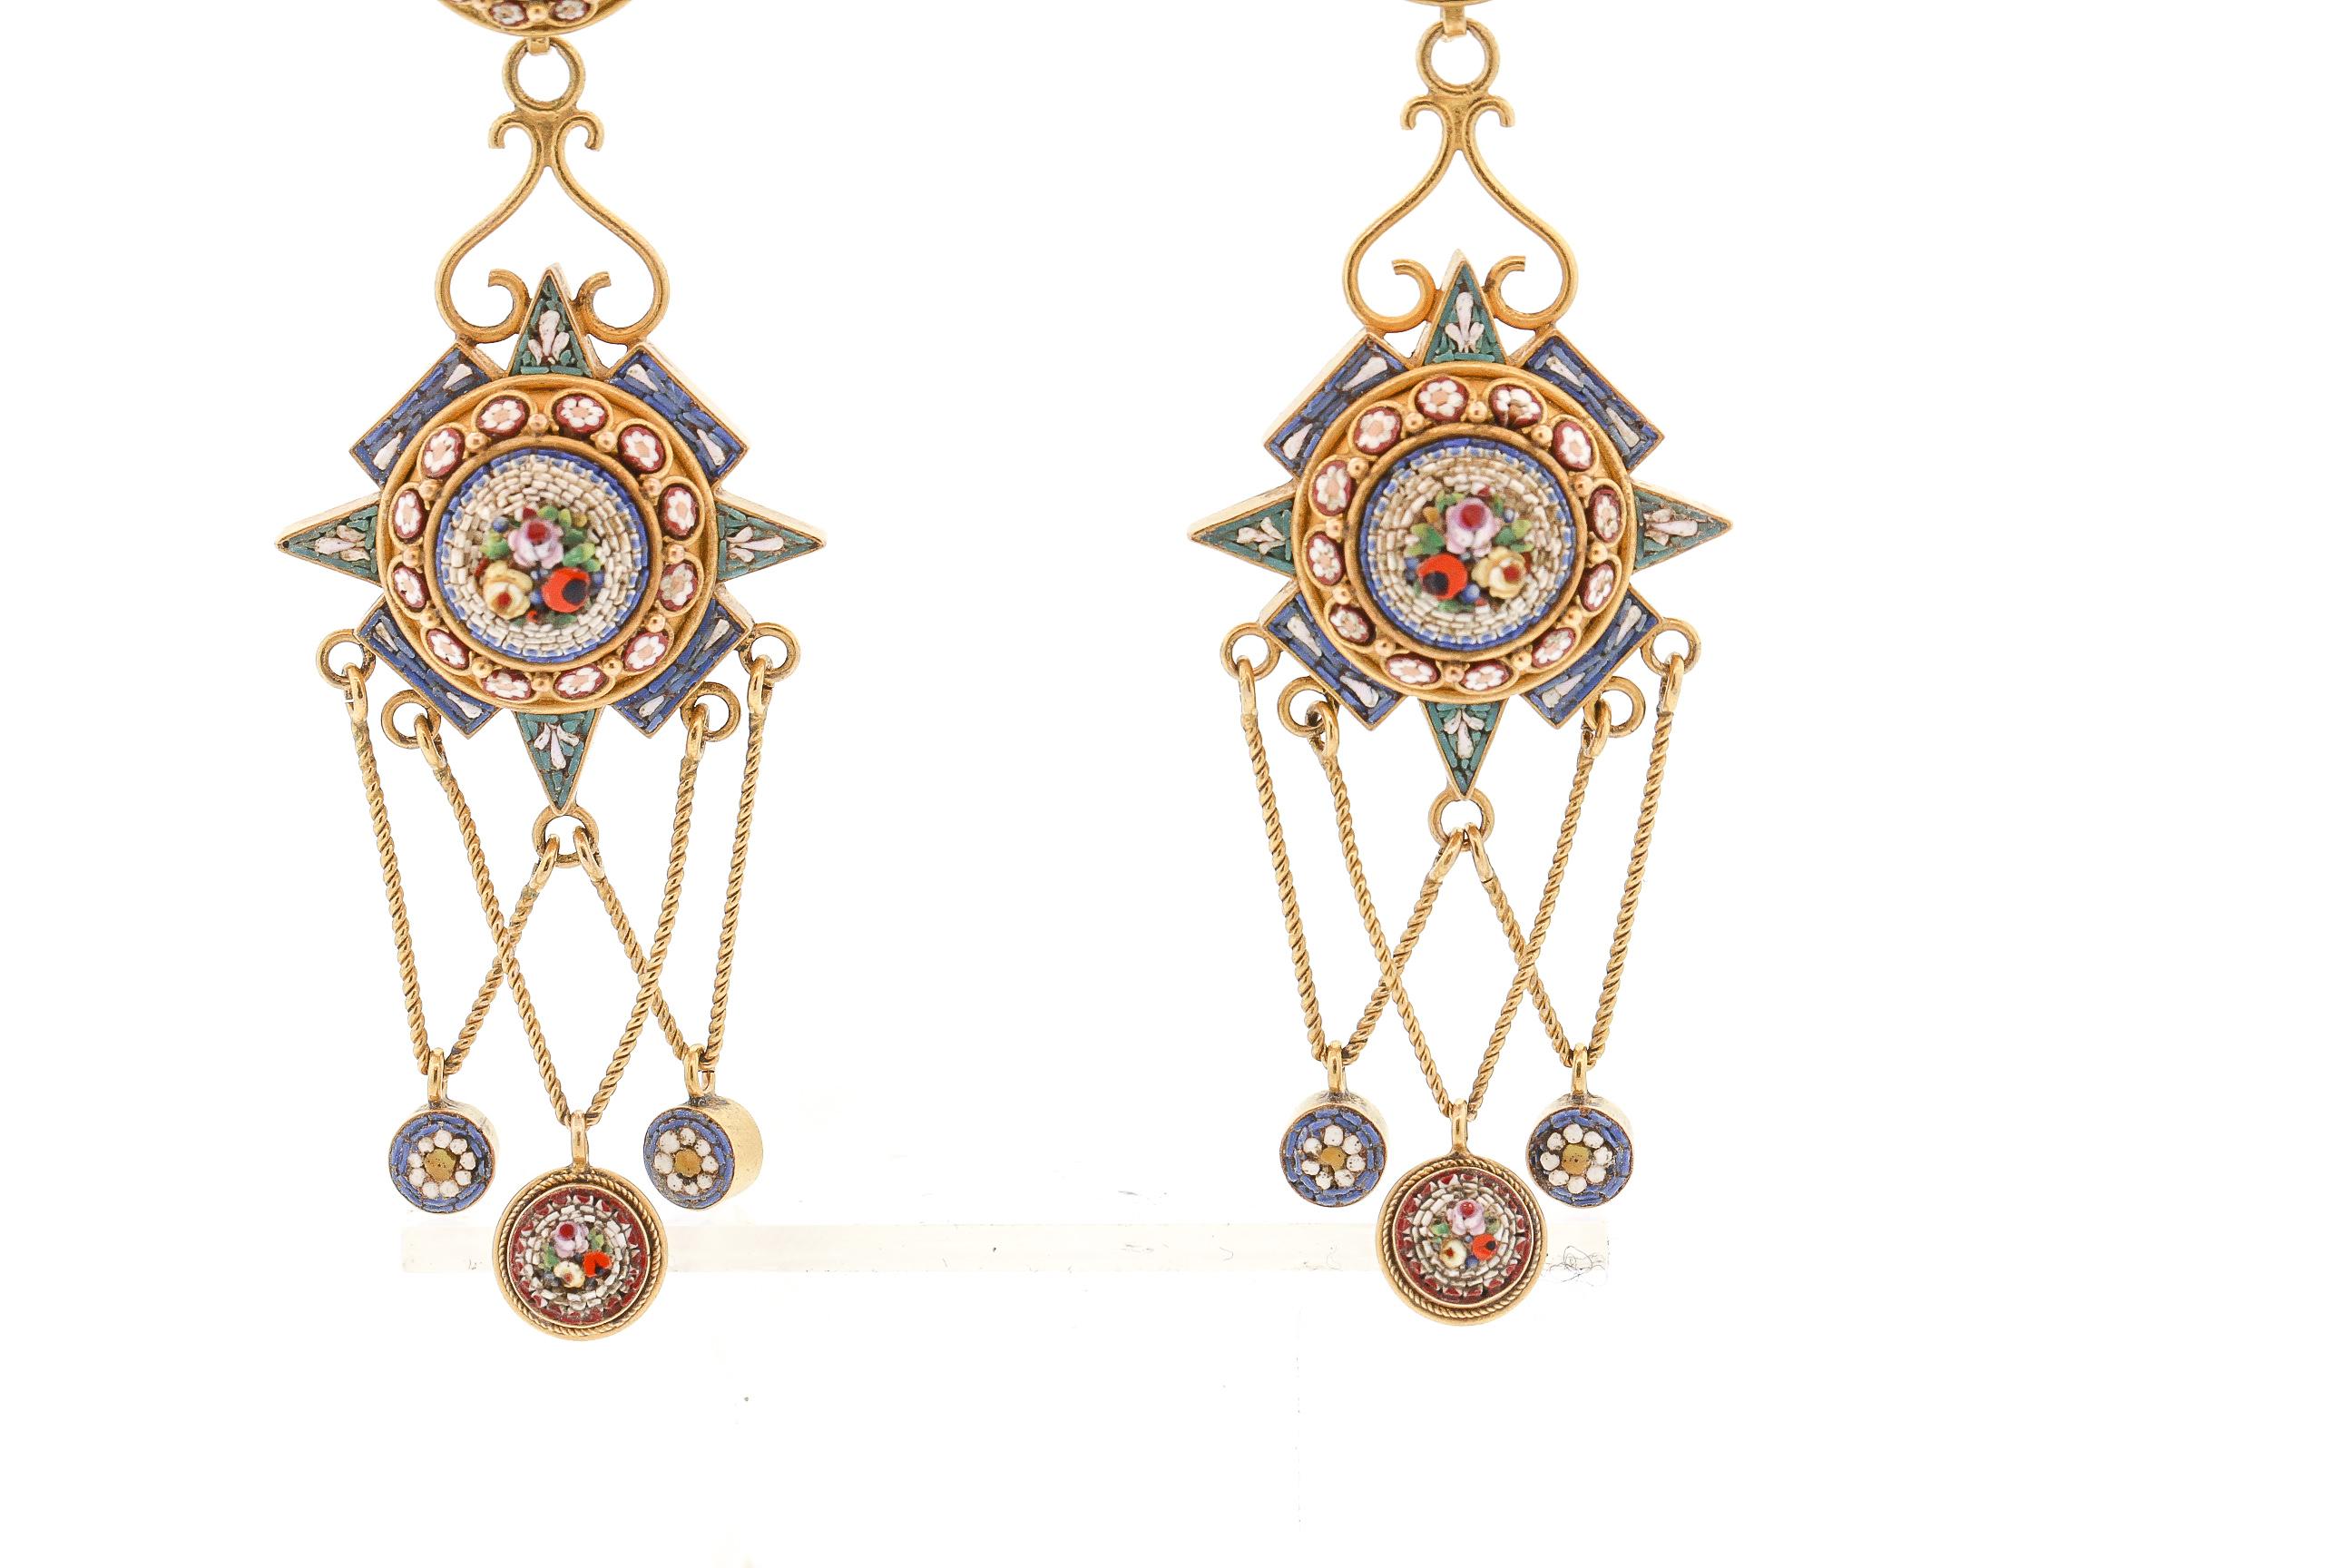 Detailed antique micromosaic pendant earrings made in 14k carat gold circa 1900. These earrings have beautiful length and movement. Very modern feeling for such an antique earring. The blue, red and white micro mosaic is set to depict colored